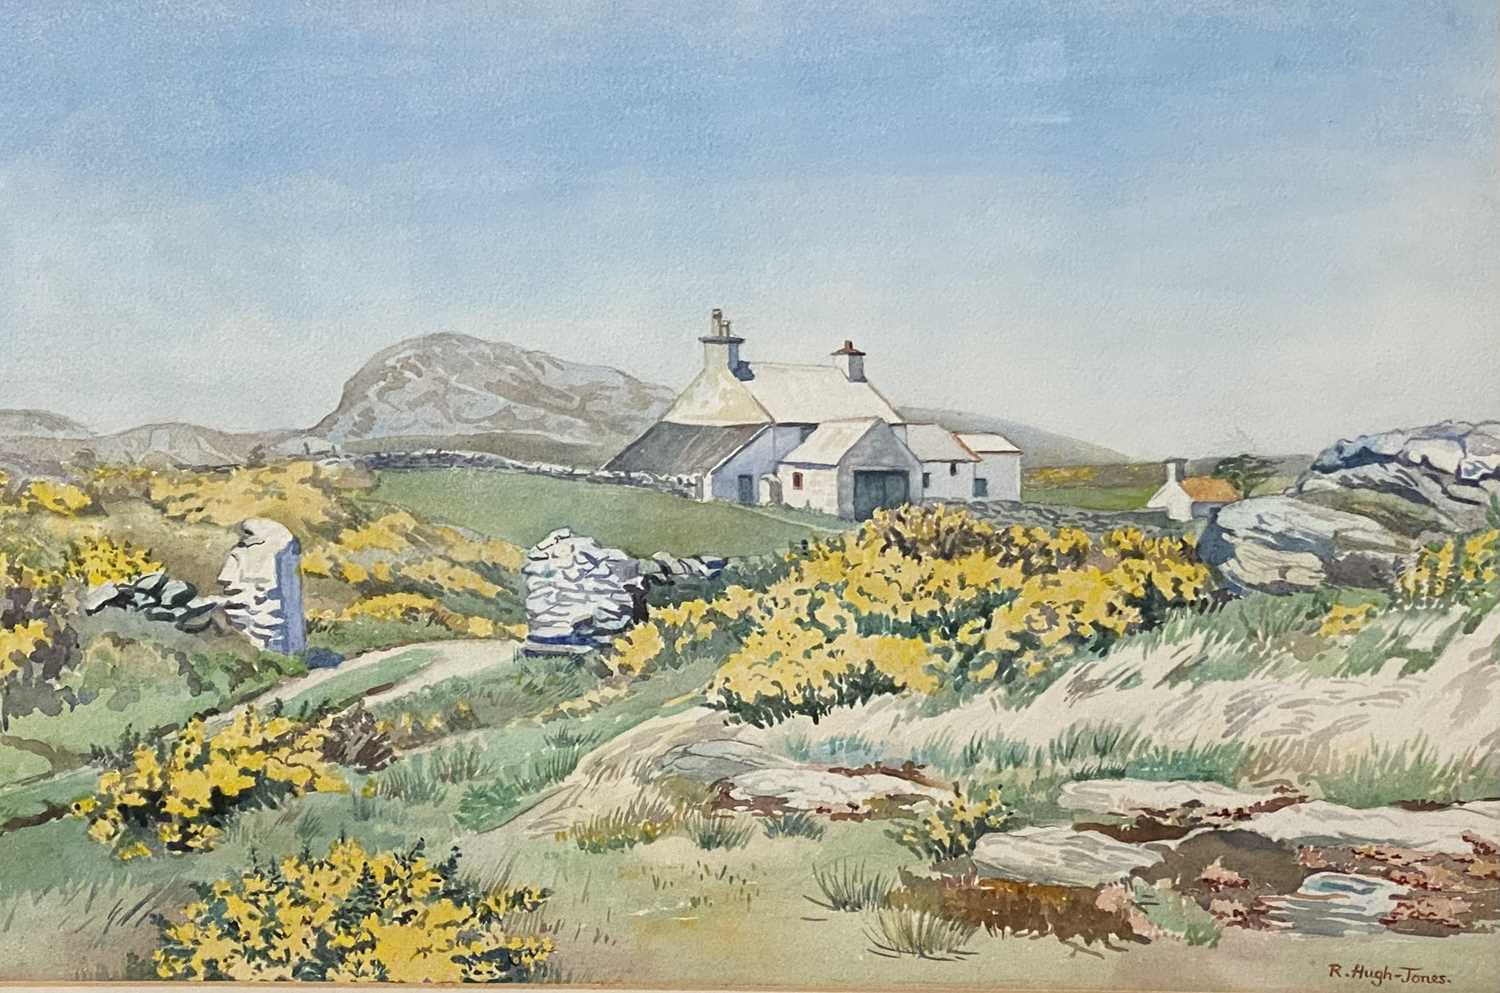 R HUGH-JONES watercolour - Anglesey rural scene with hilltop smallholding and flowering gorse,